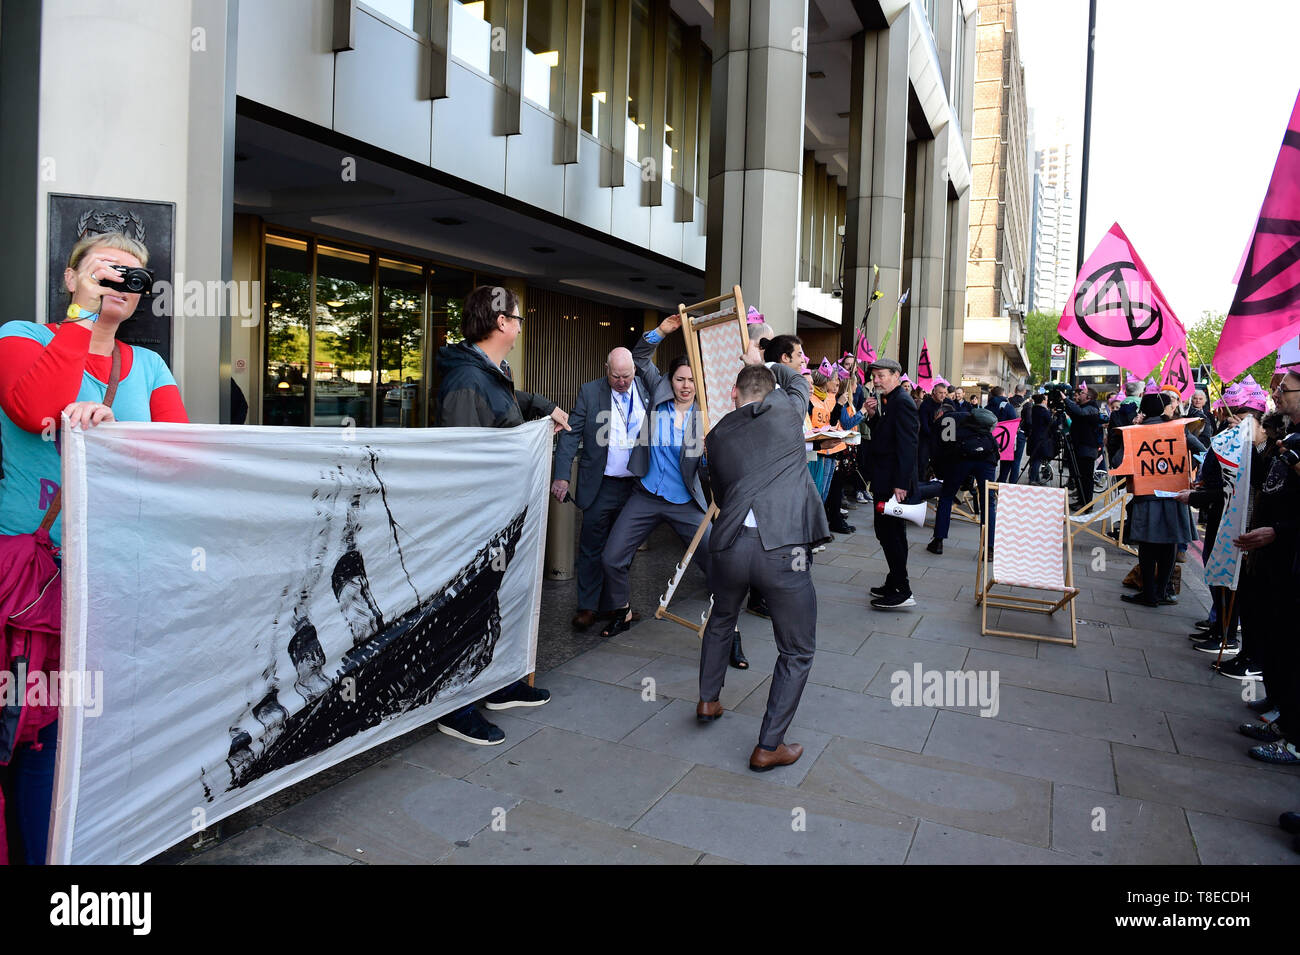 London, UK. 13th  May, 2019. Extinction Rebellion climateExtinction Rebellion Gather outside the International Maritime Organisation demand that the IMO declare a climate emergency. with delegates from 190+ countries meeting in London to discuss and agree on immediate measures to reduce shipping’s climate impacts. Credit: Quan Van Alamy/Live News Stock Photo